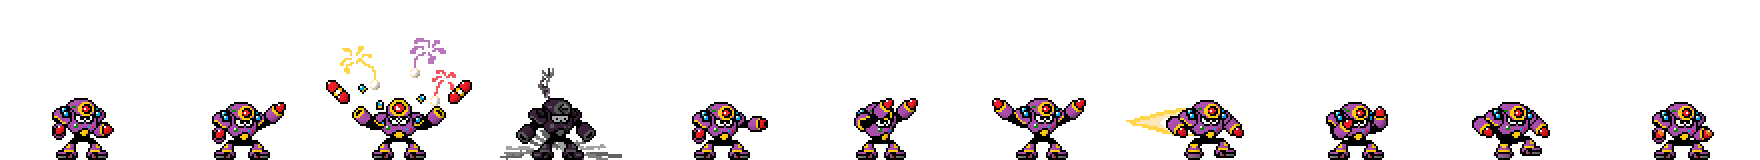 Napalm Man | Base Sprite Right<div style="margin-top: 4px; letting-spacing: 1px; font-size: 90%; font-family: Courier New; color: rgb(159, 150, 172);">[robot:right:base]{napalm-man}</div>